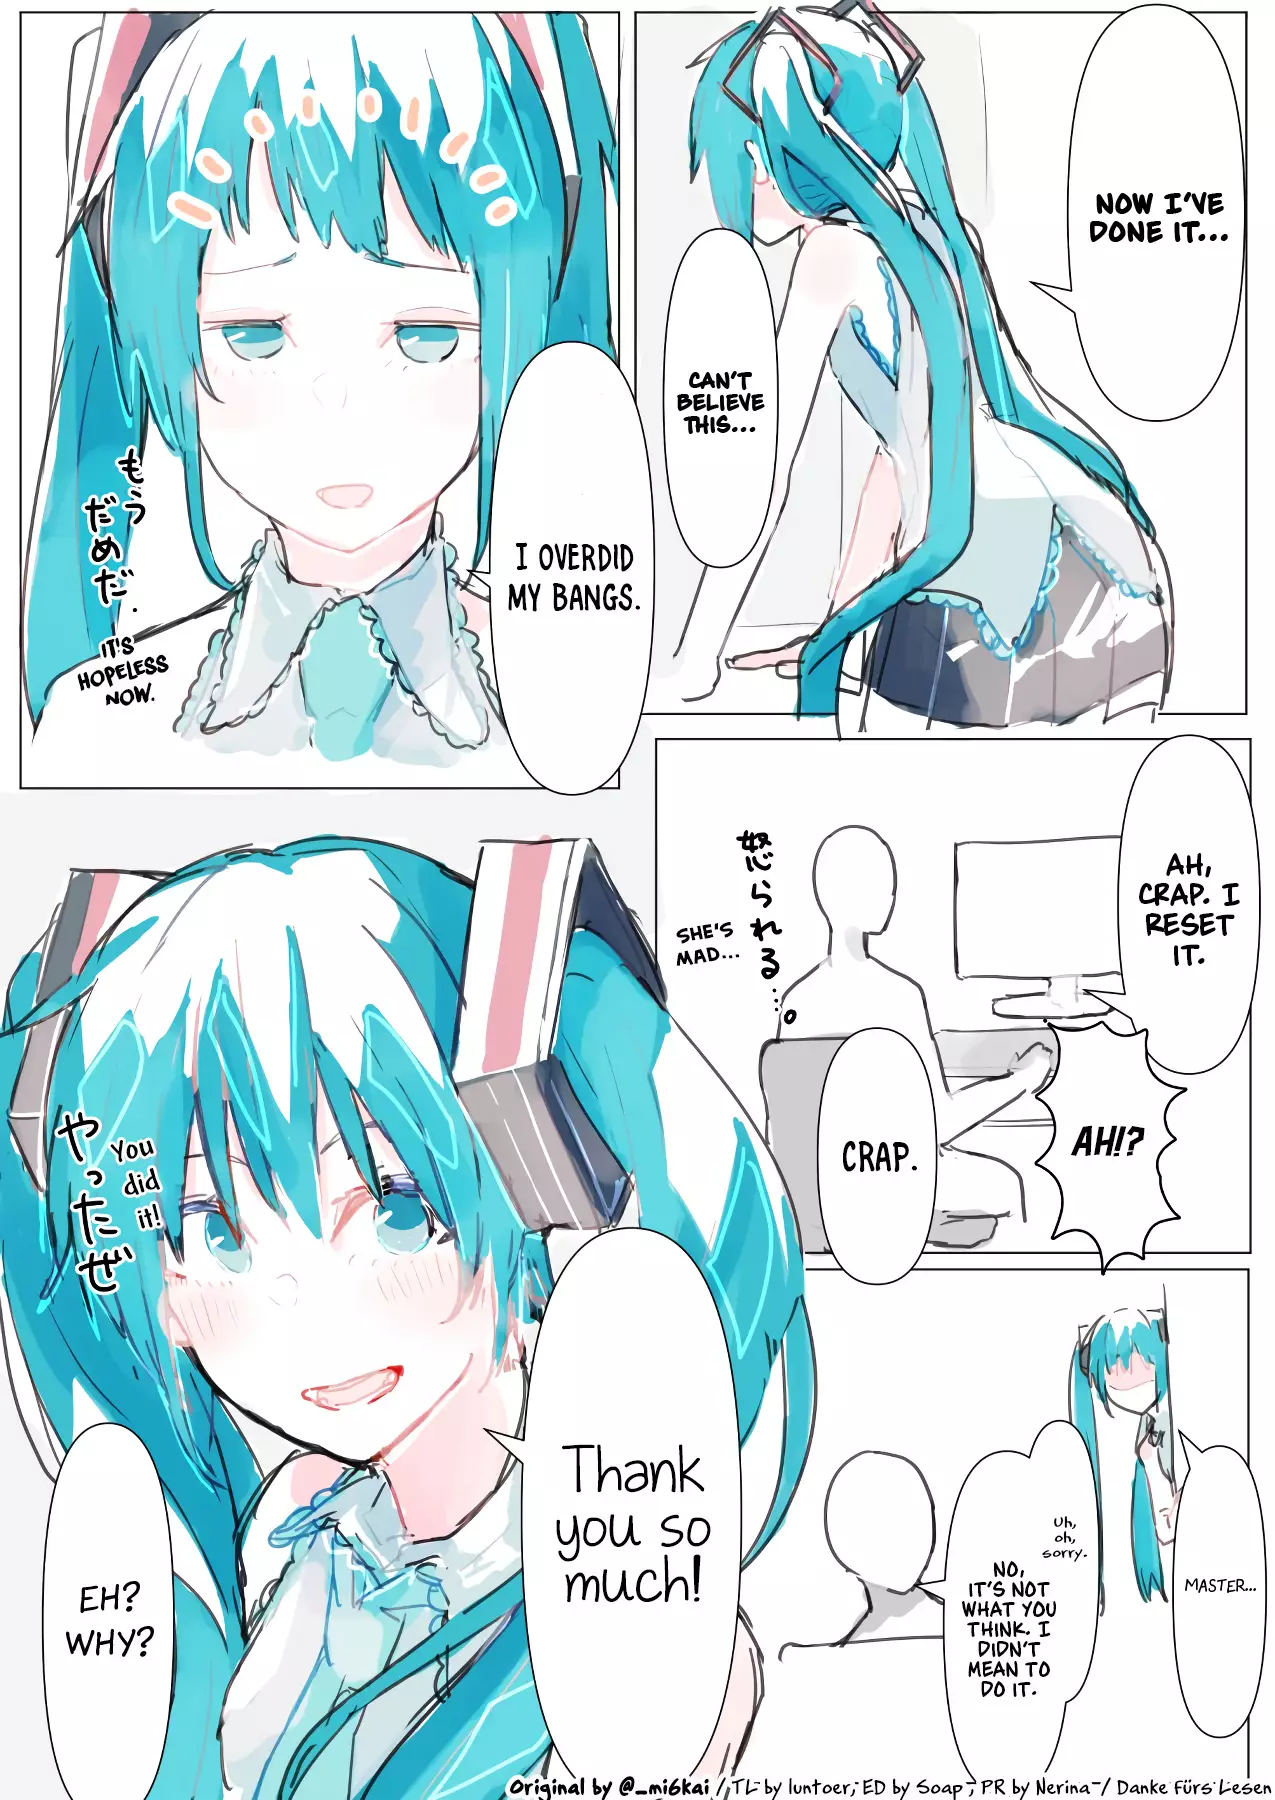 The Daily Life Of Master & Hatsune Miku - 15 page 1-c07ba348